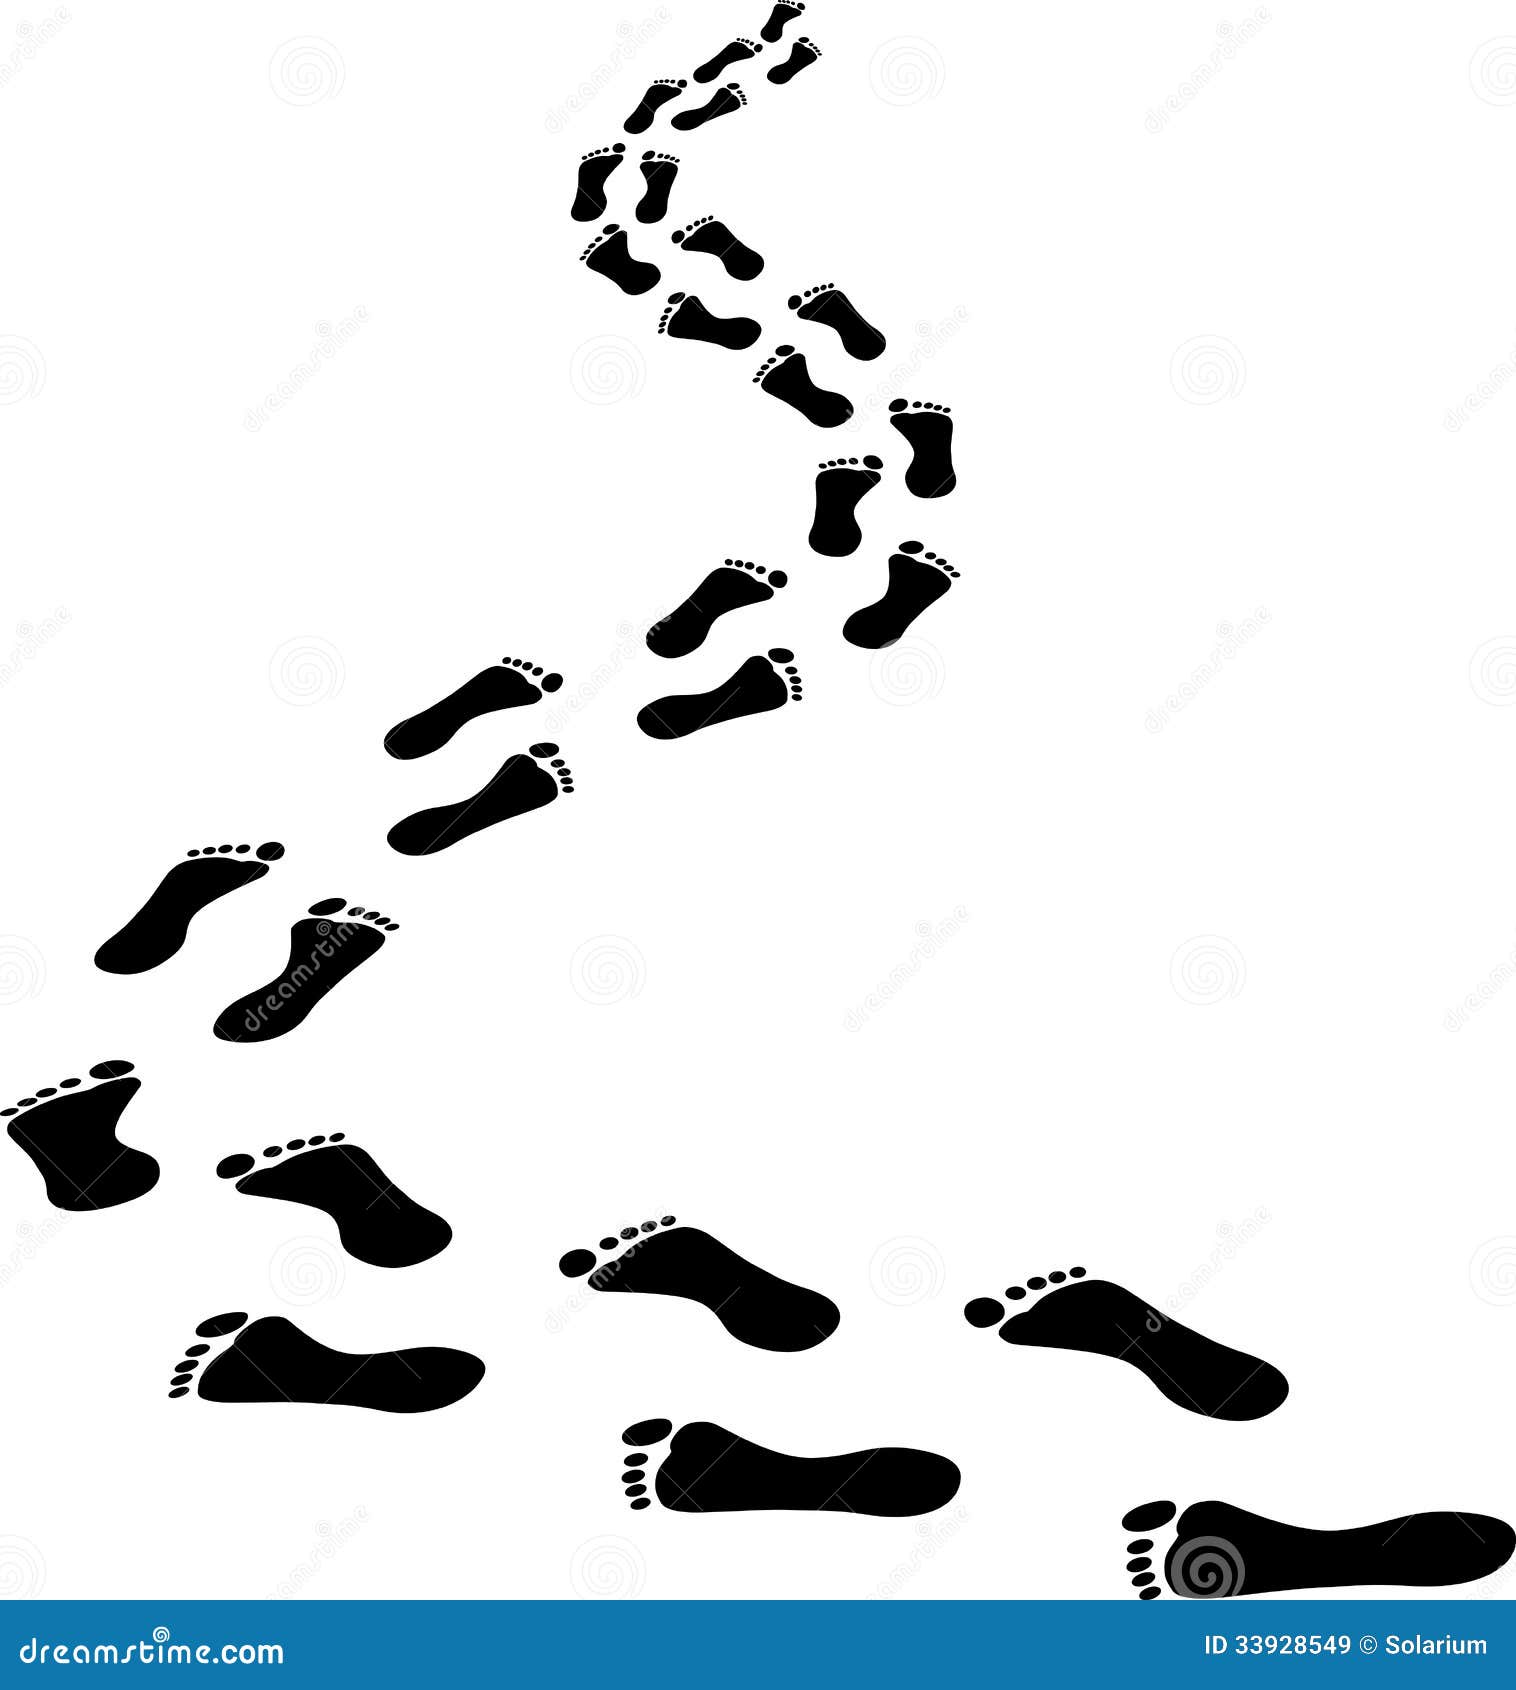 Footprints Royalty Free Stock Images - Image: 33928549